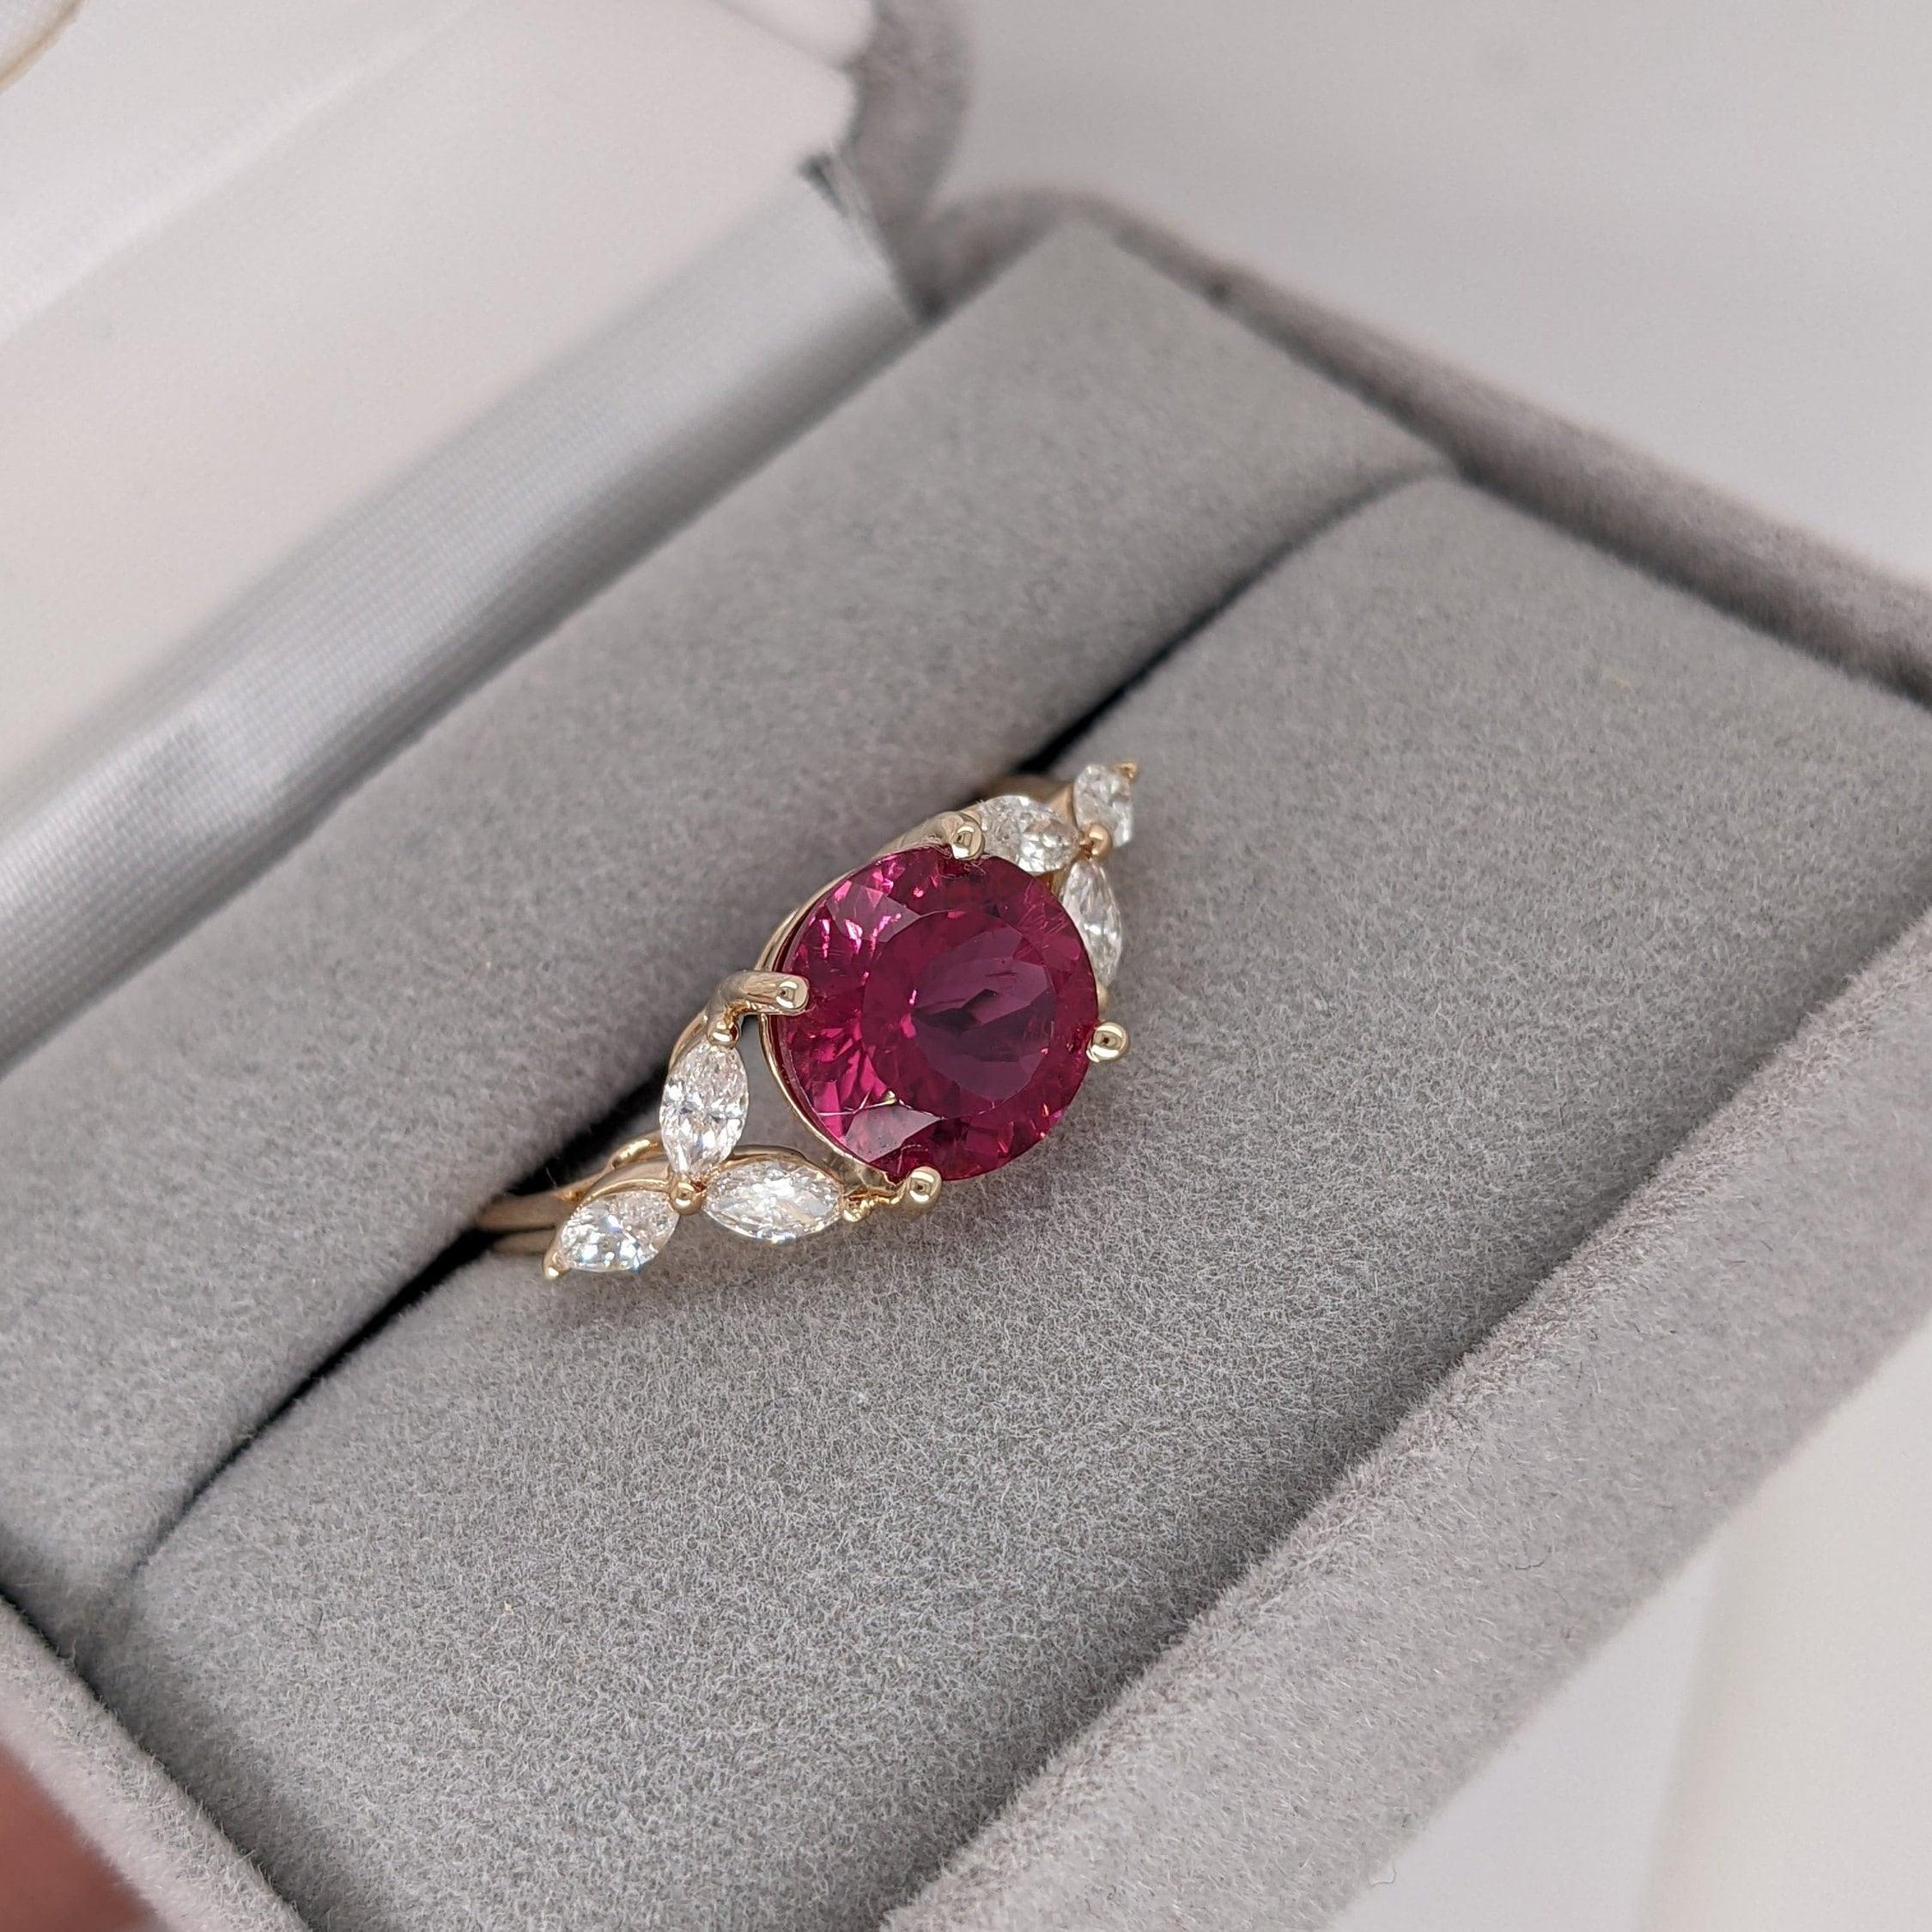 2ct Rubellite Tourmaline Ring w Earth Mined Diamonds in Solid 14k Gold Round 8mm For Sale 2